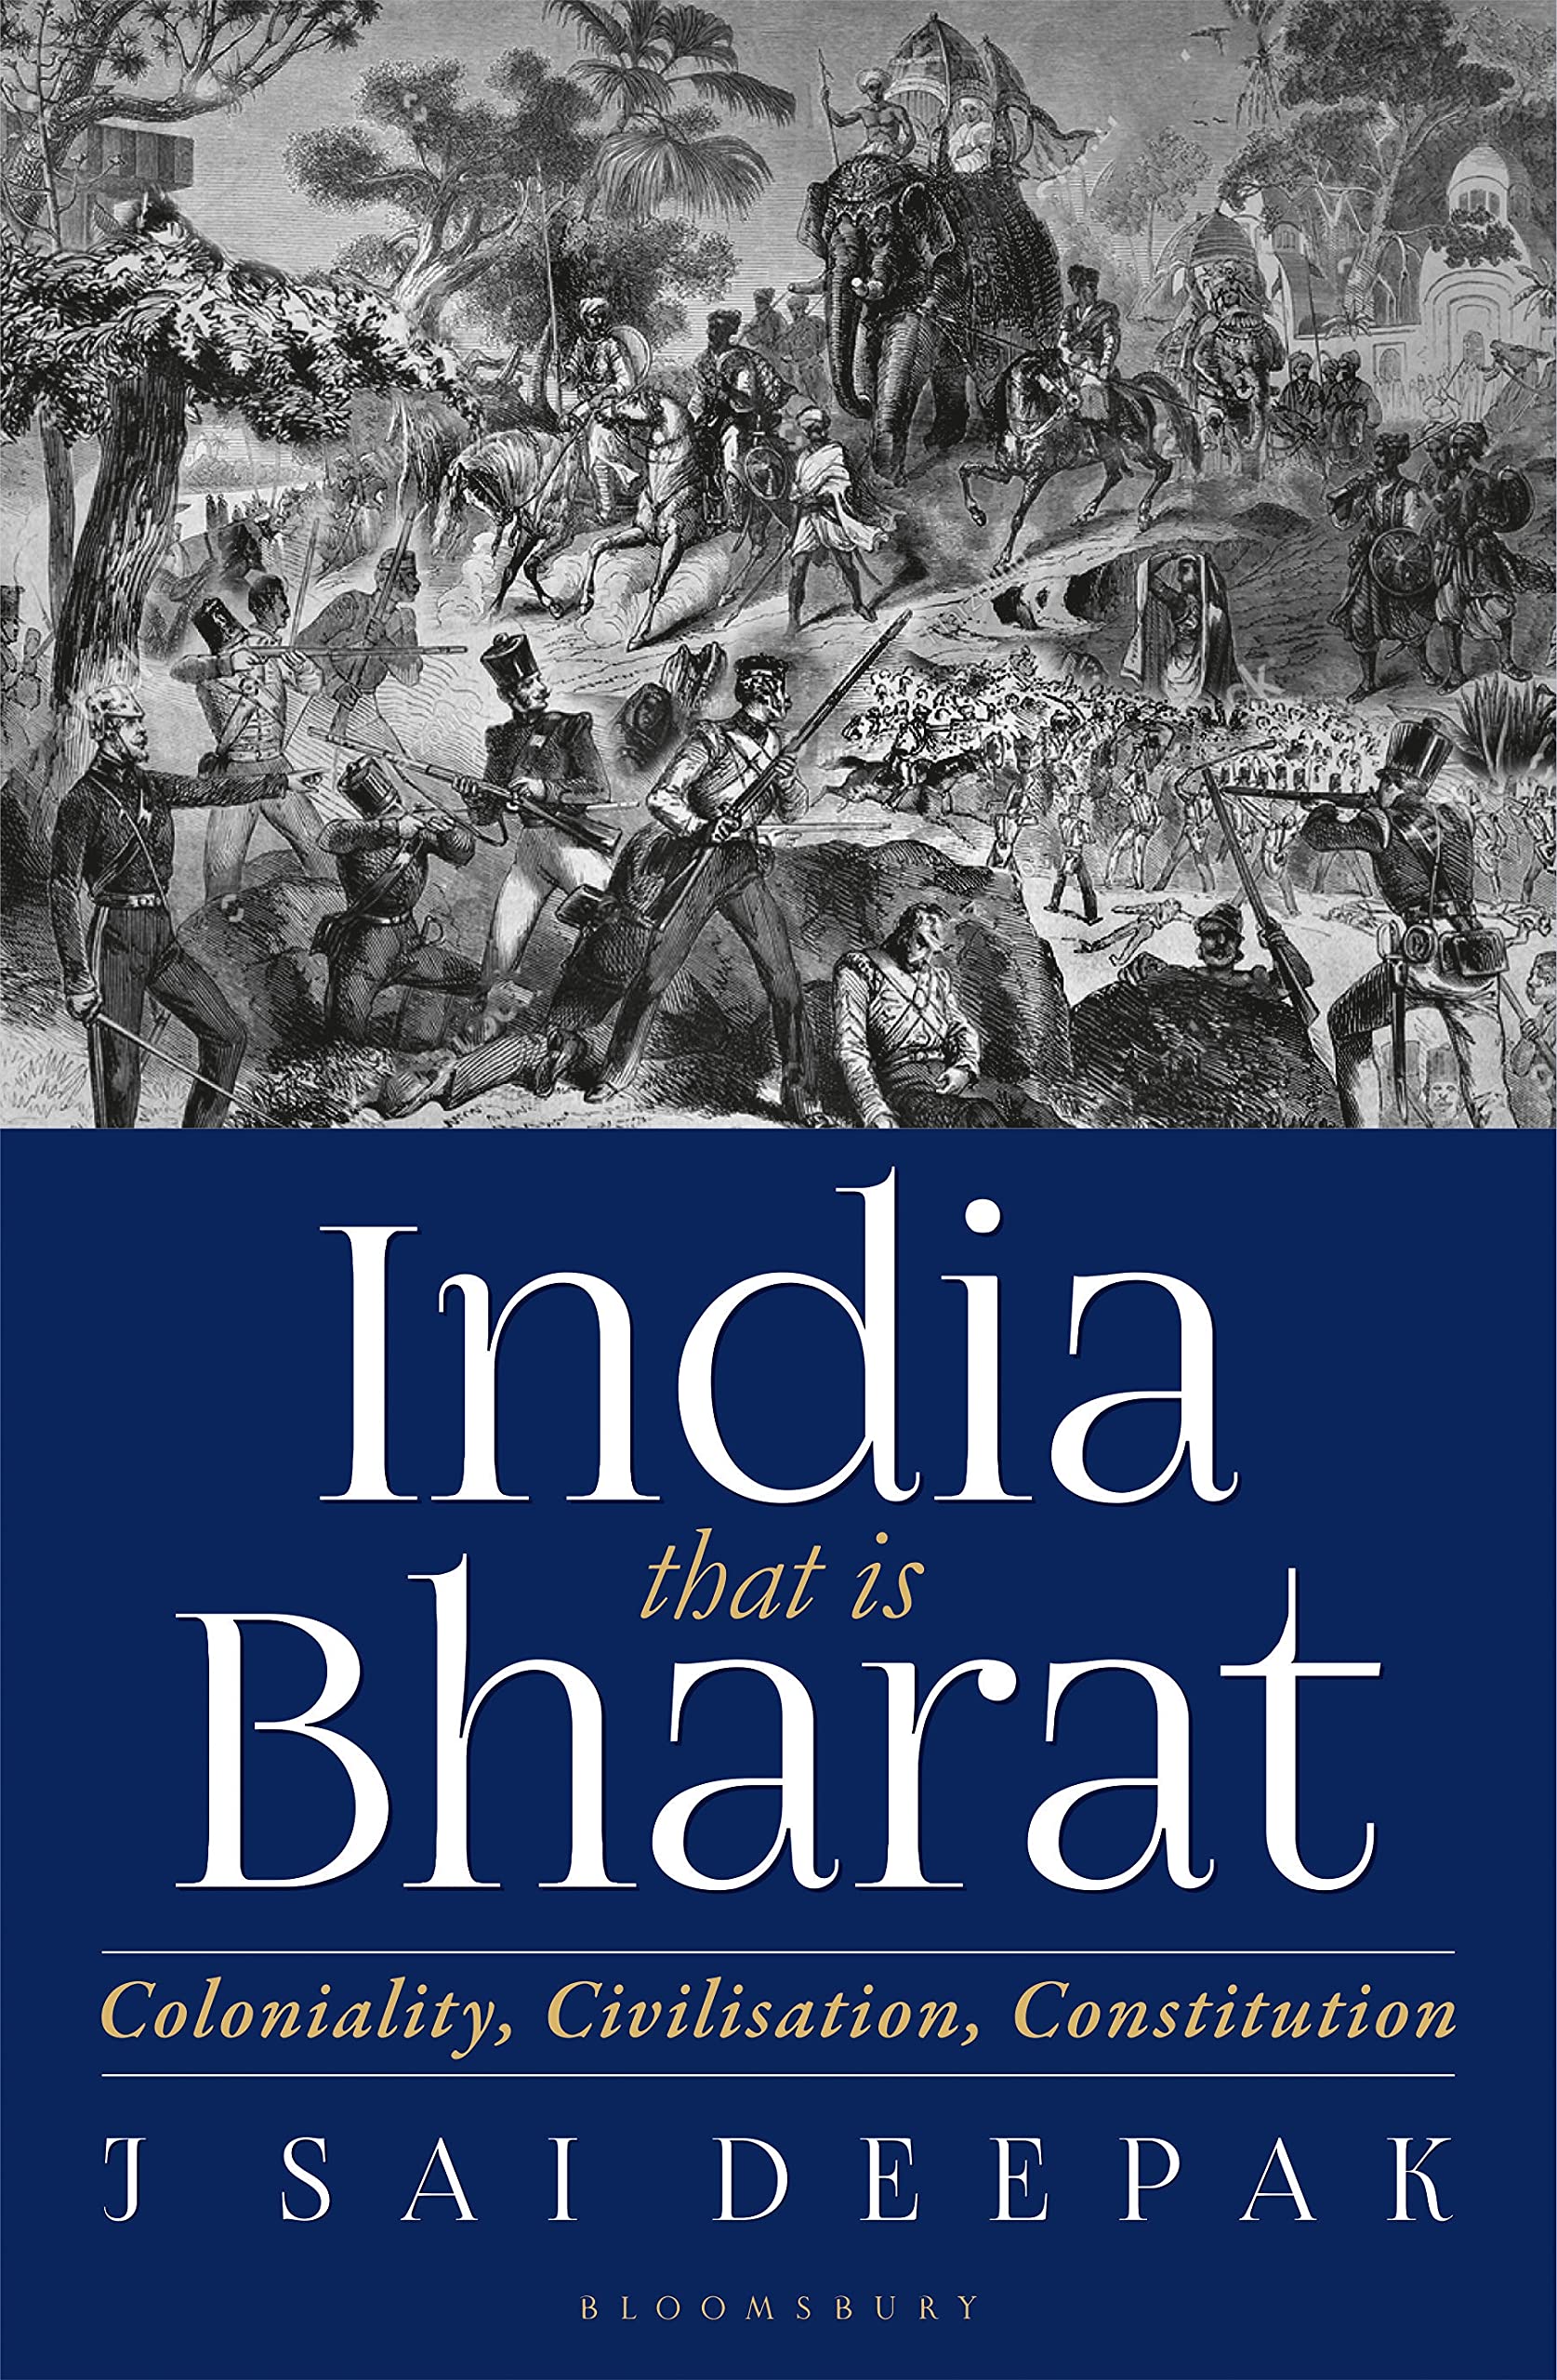 “India That is Bharat: Coloniality, Civilization, Constitution” – A Review